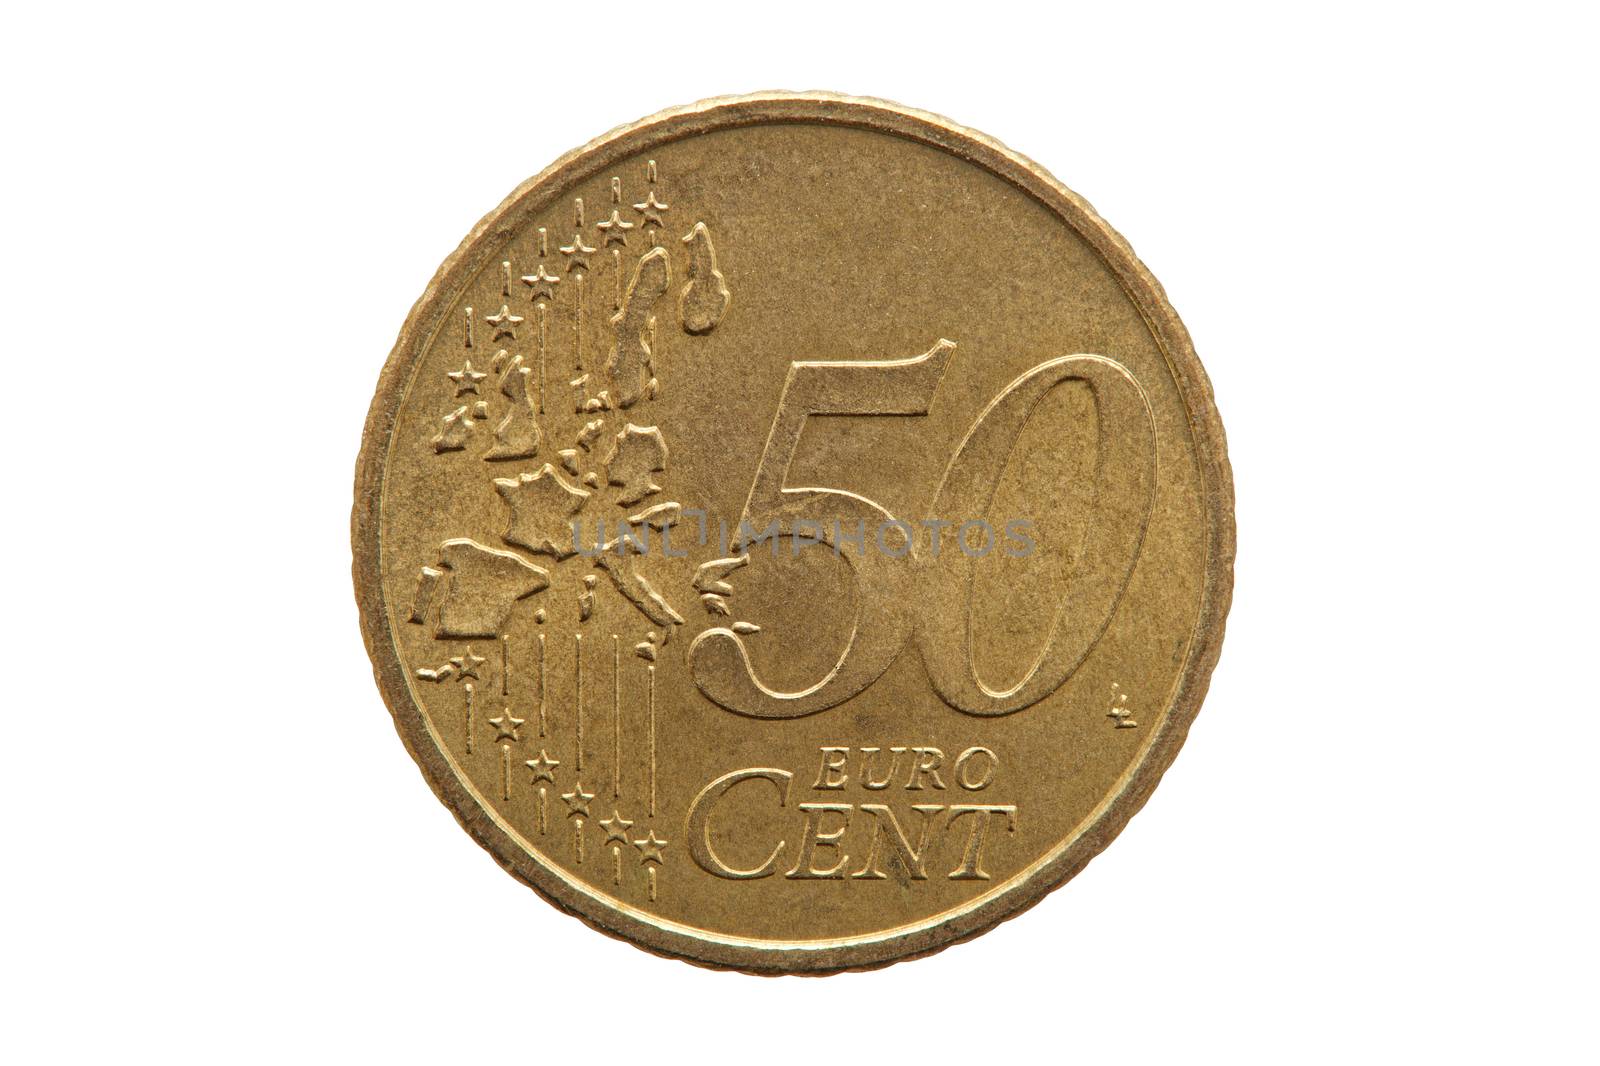 Fifty cent euro coin of Germany dated 2002 cut out and isolated on a white background